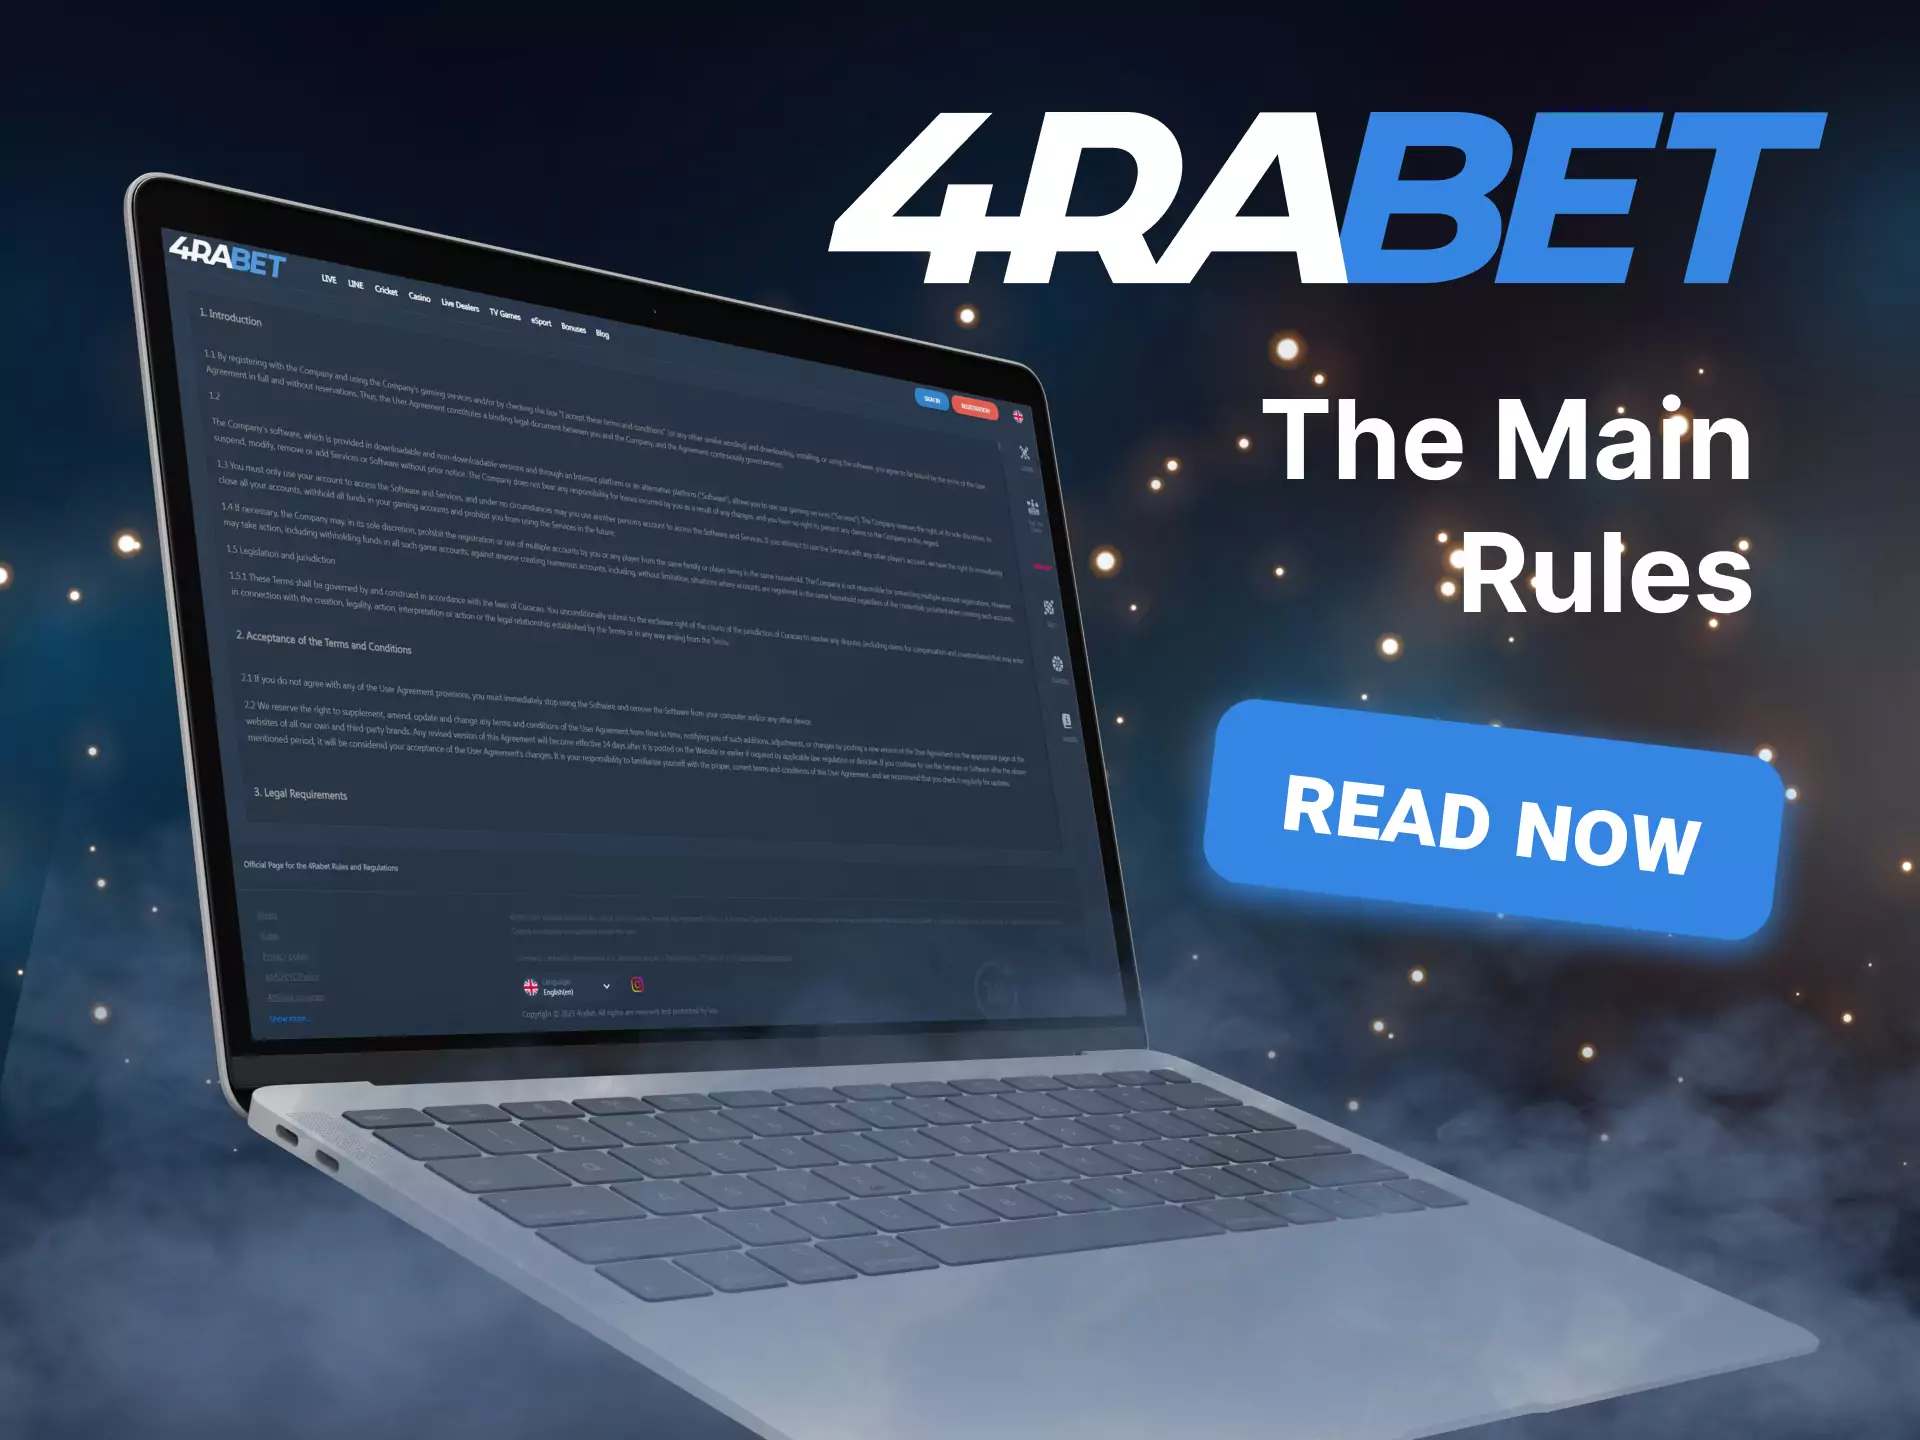 Read the basic rules of 4rabet.